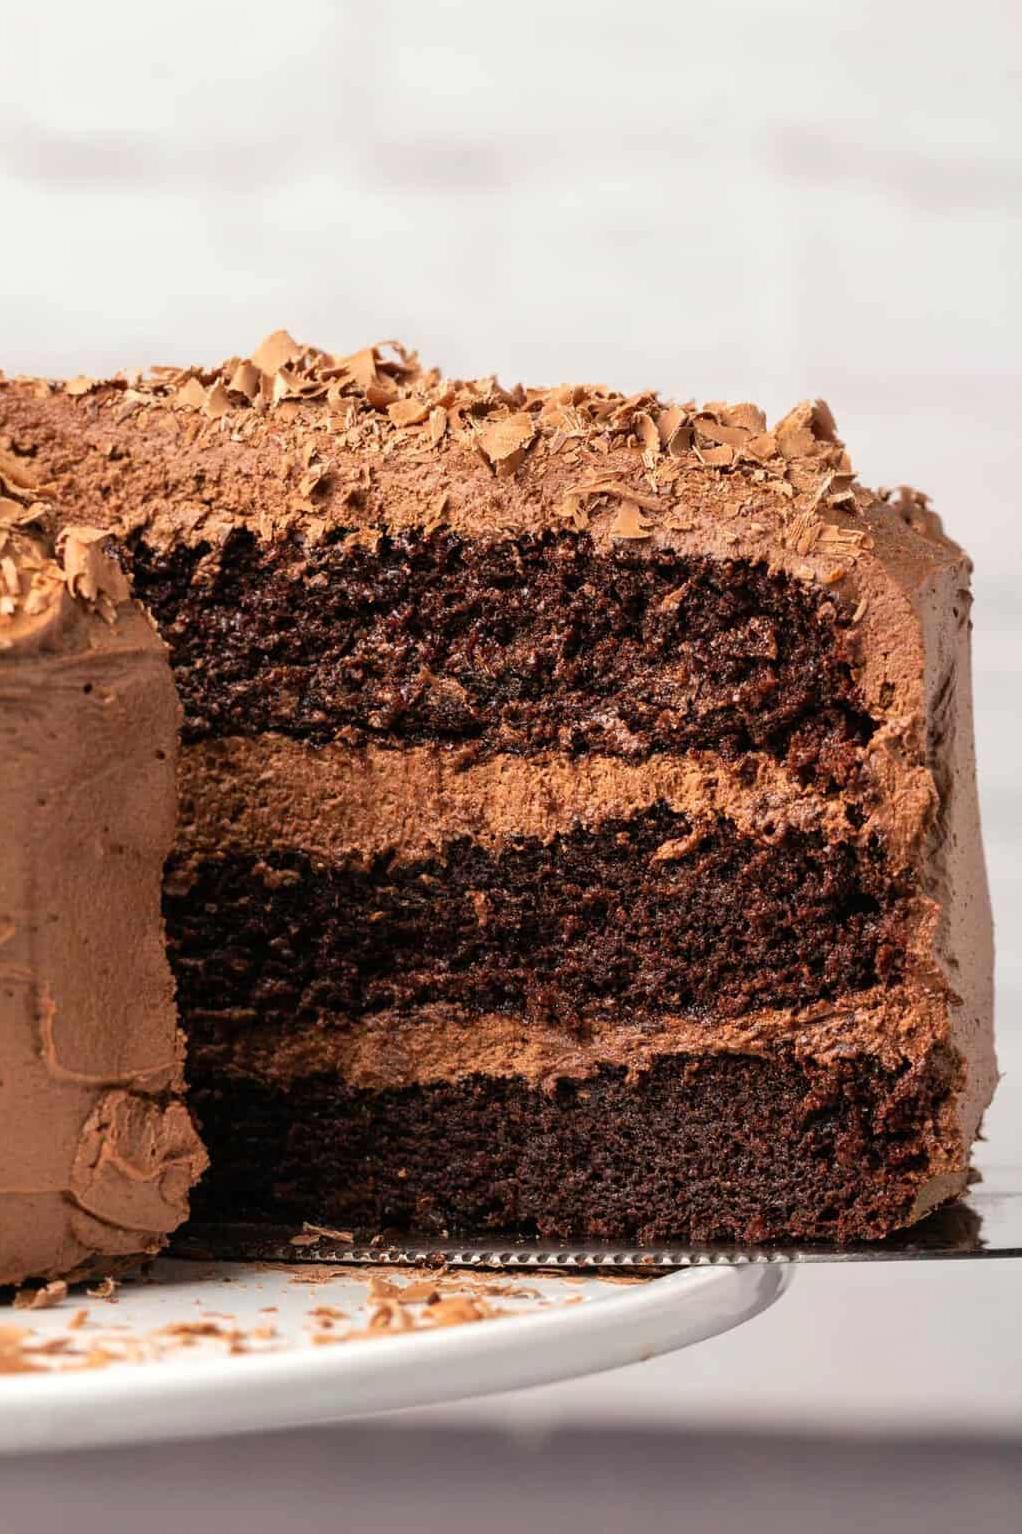  Our chocolate cake is so delicious, you won't believe it's dairy-free!